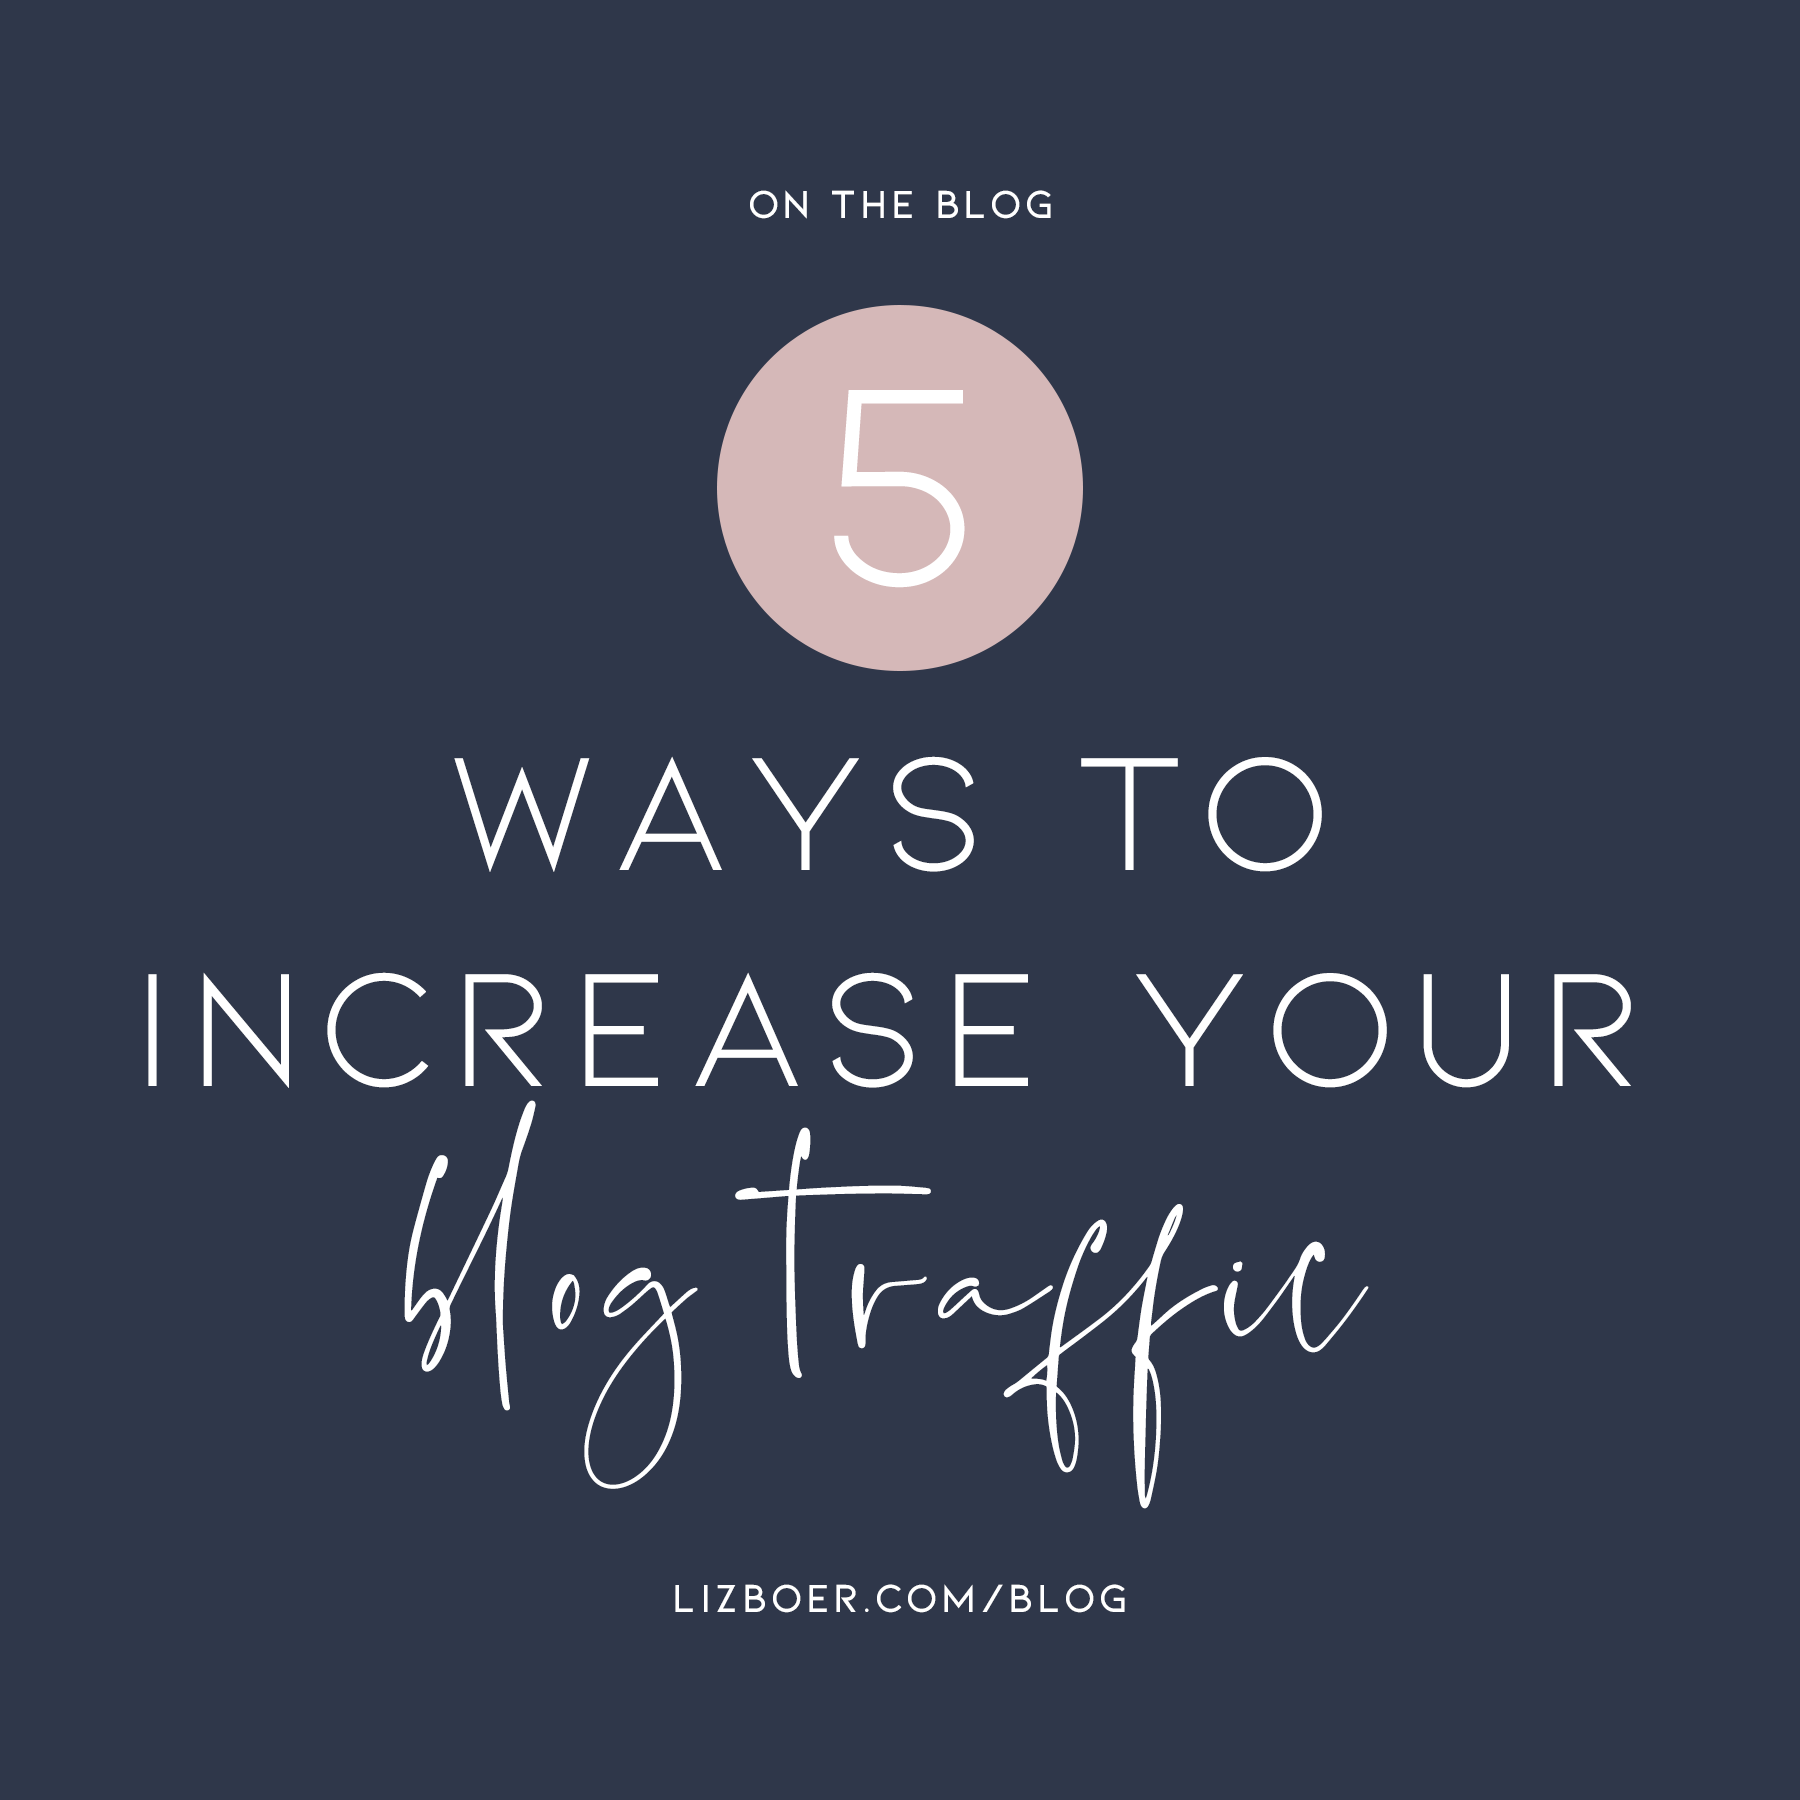 5 ways to Increase Traffic to your Site.